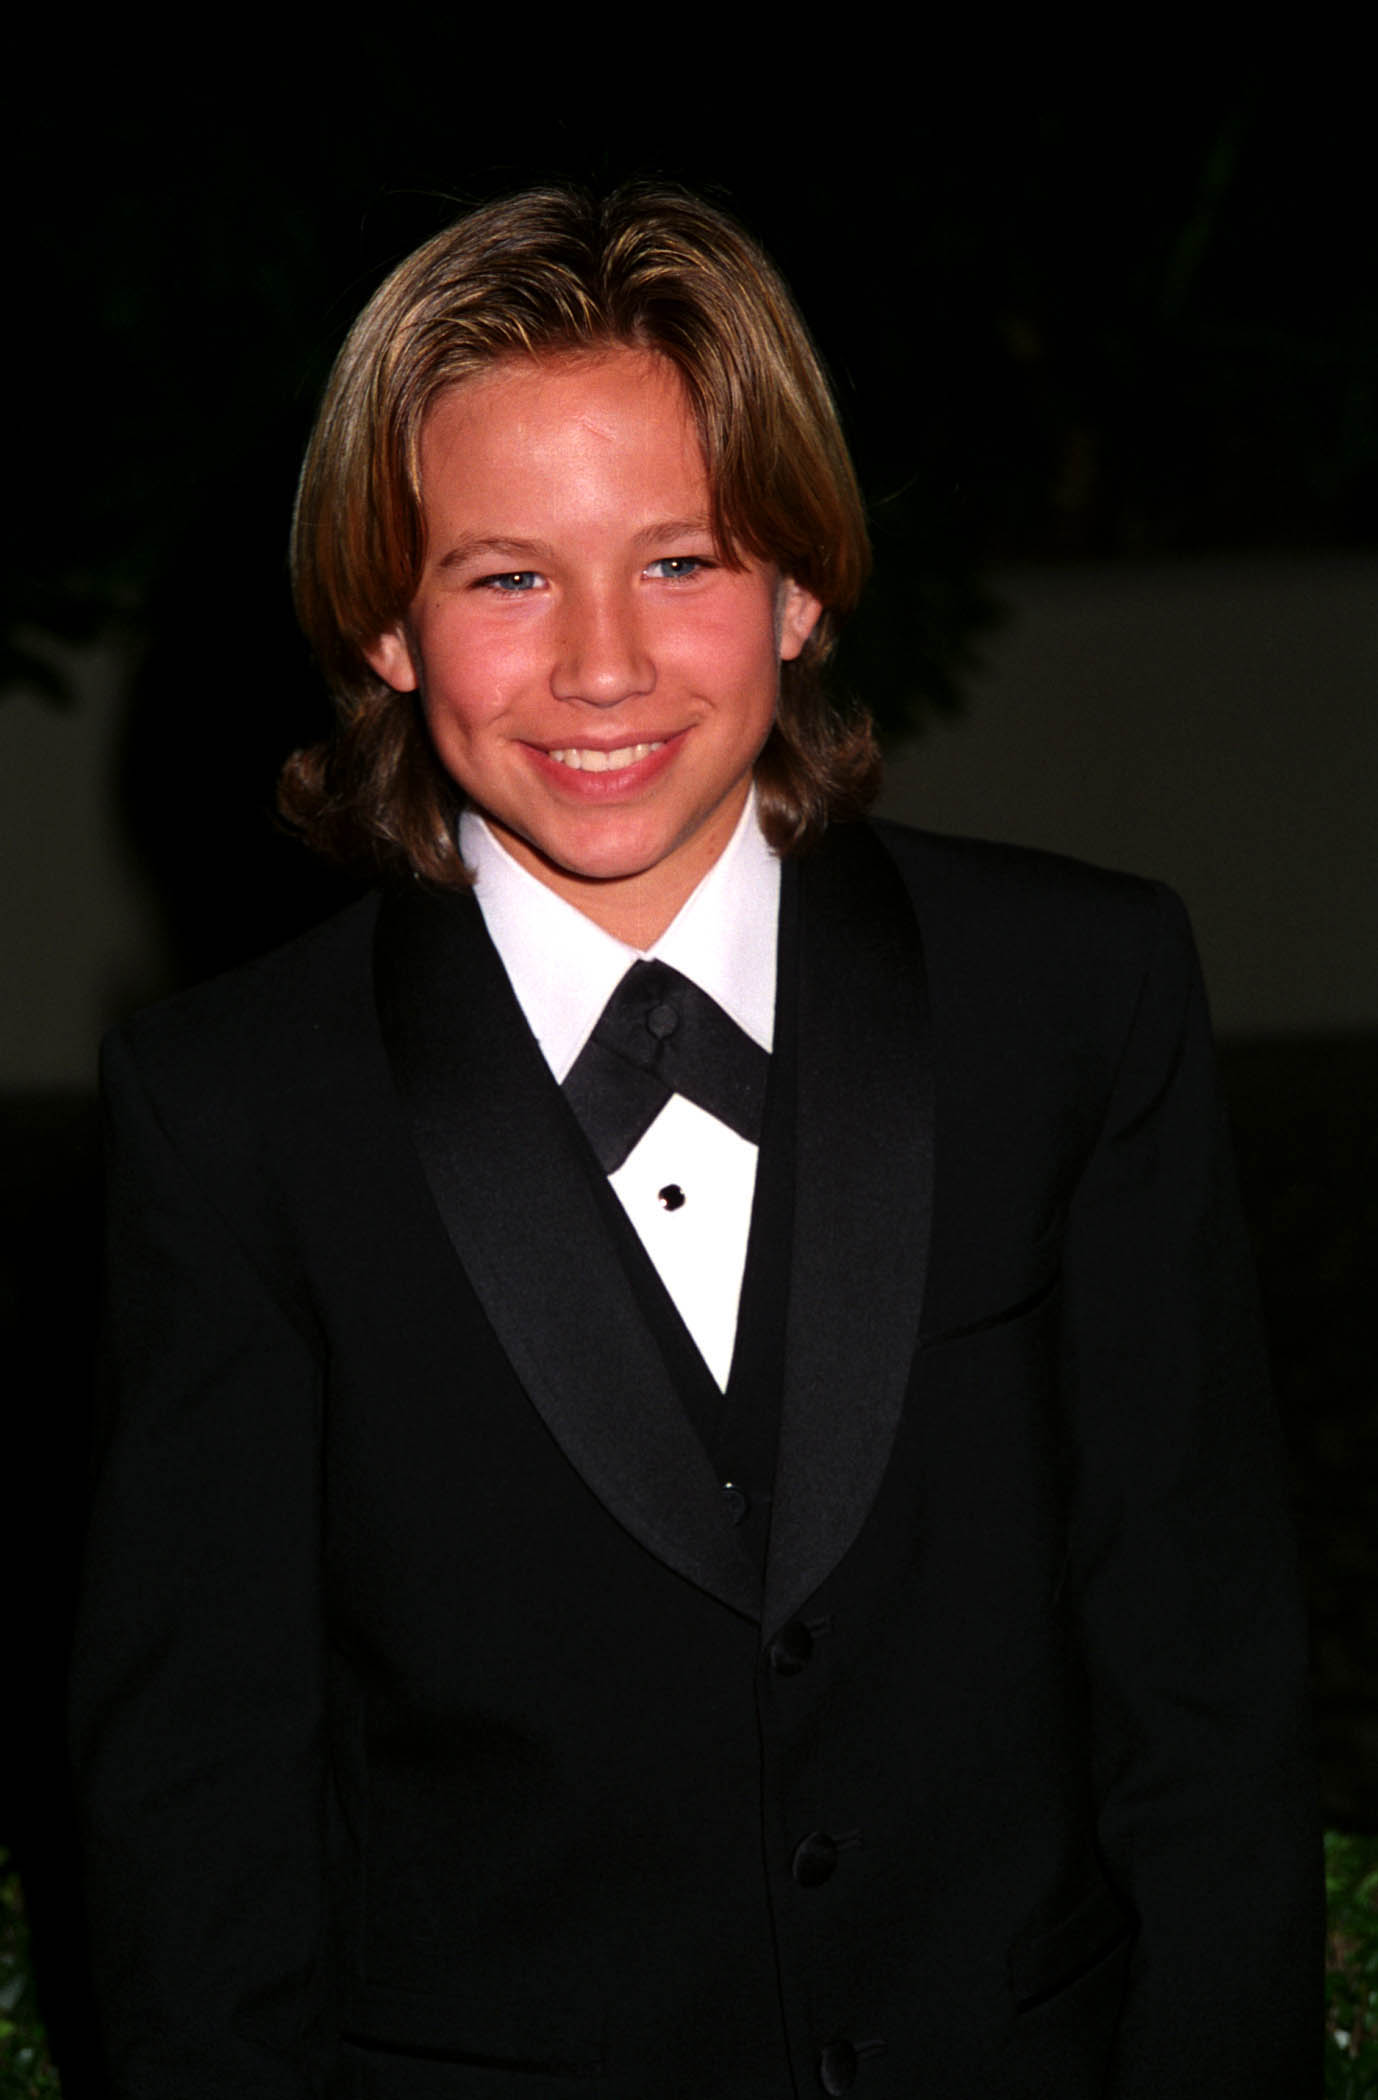 Jonathan Taylor Thomas during the 1995 Golden Globe Awards on September 7, 1995 in Los Angeles, California | Source: Getty Images